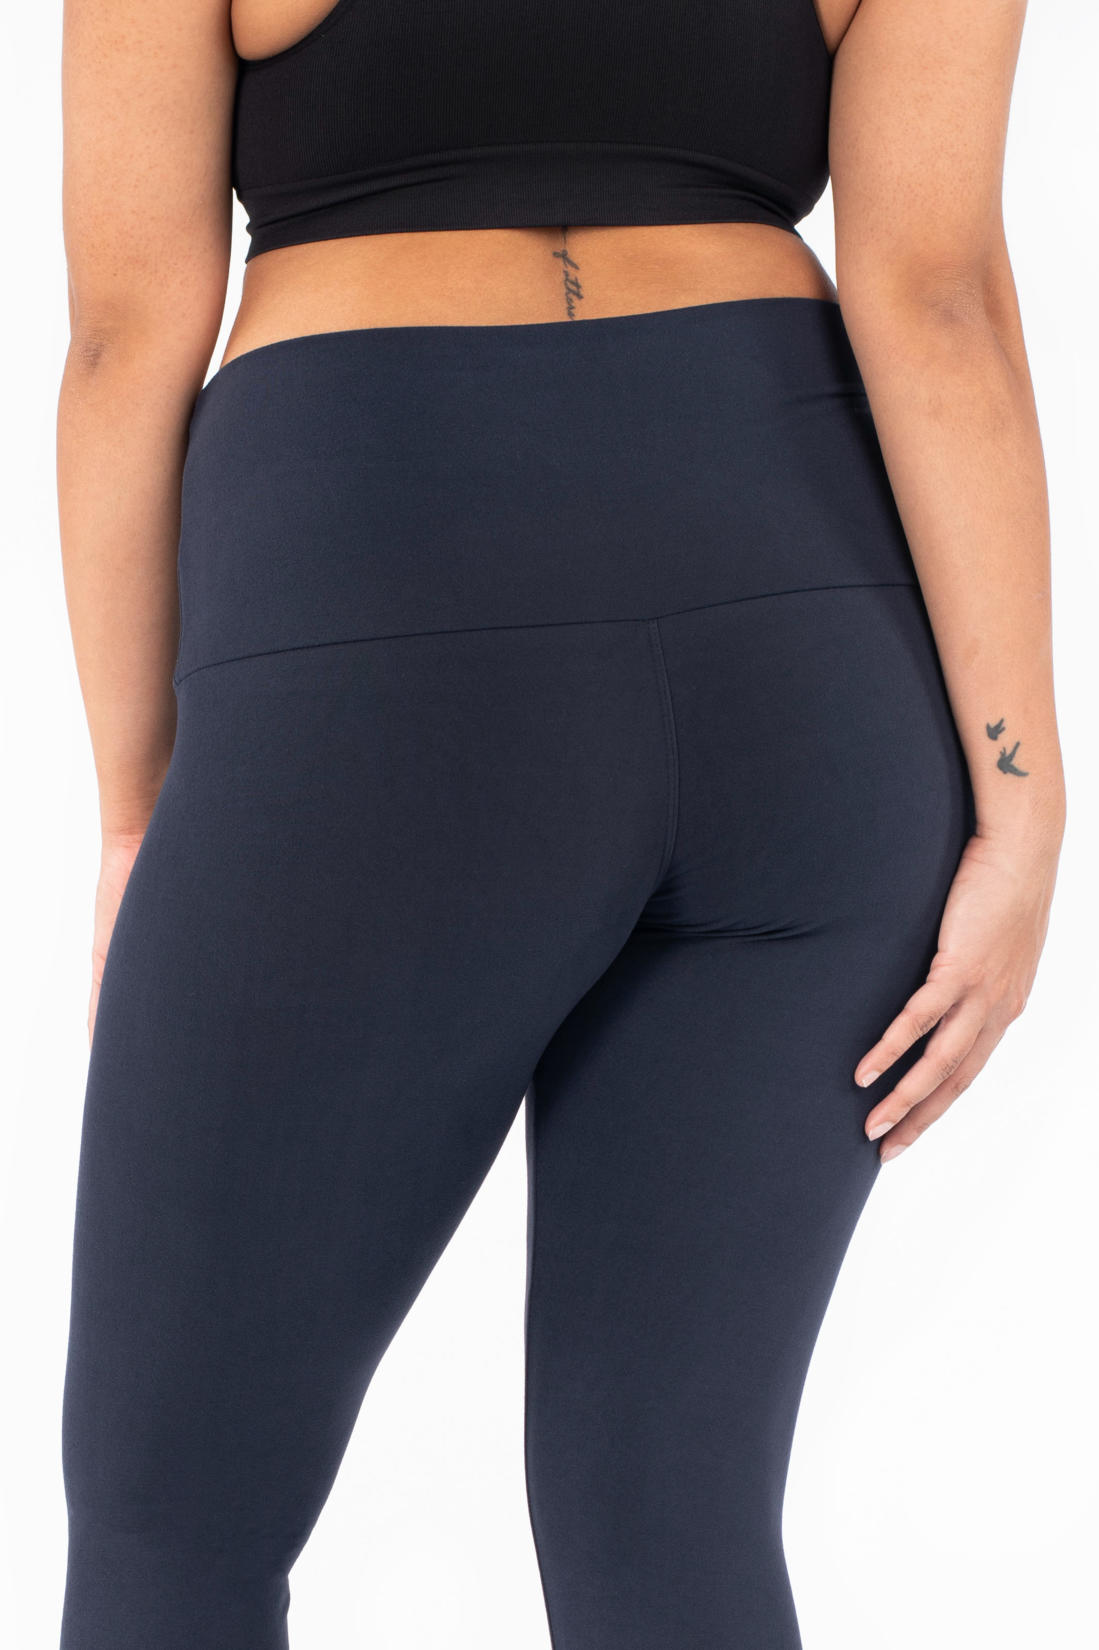 Yogalicious Women's Yoga Pants - clothing & accessories - by owner